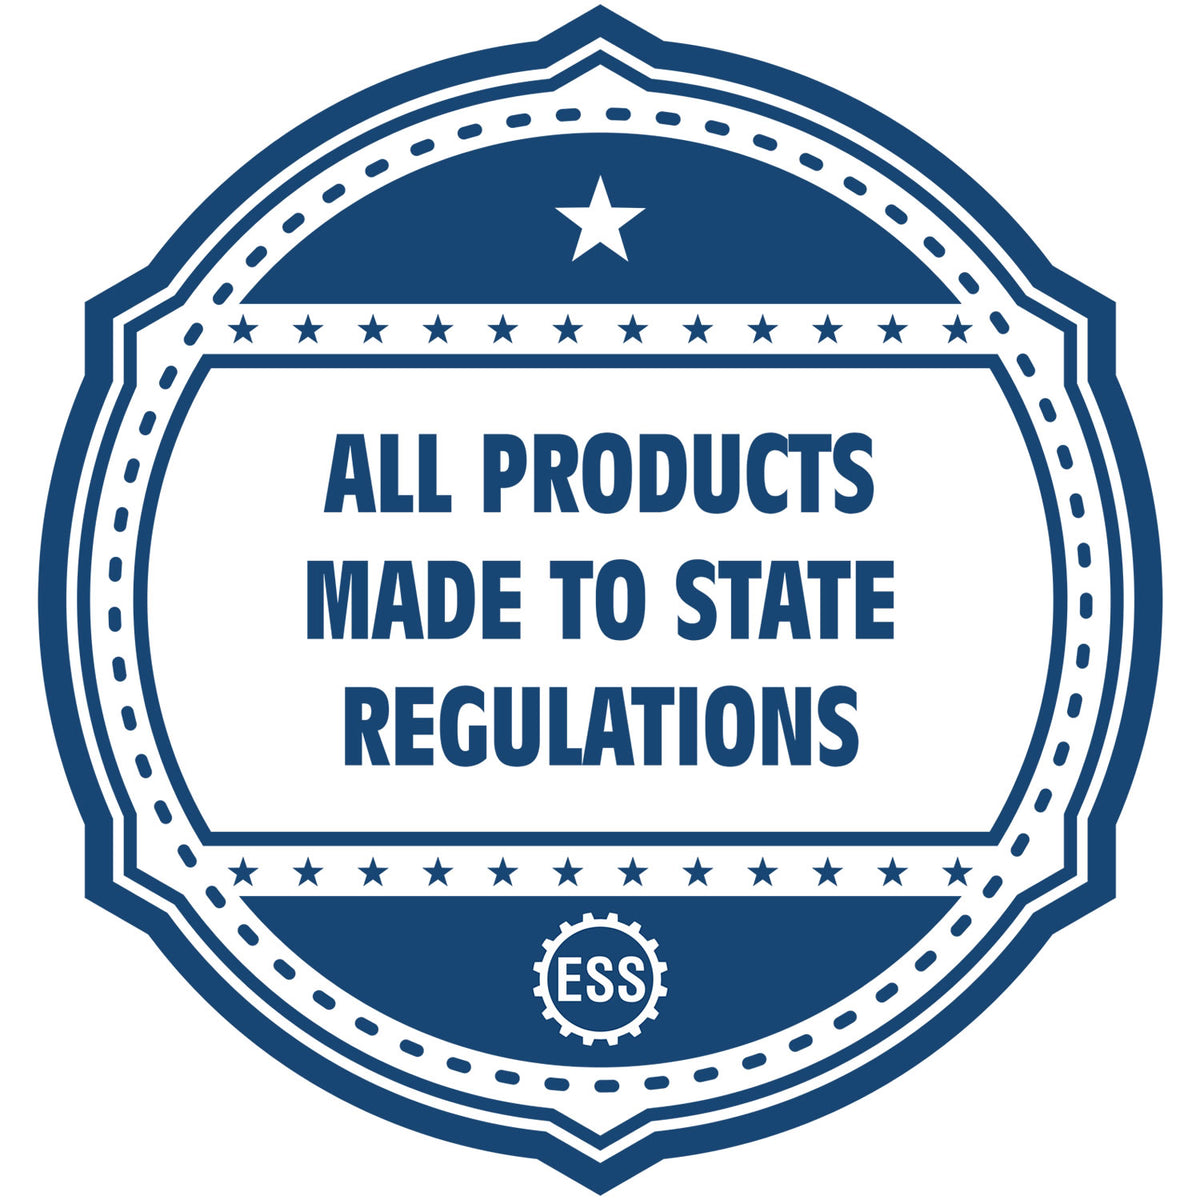 An icon or badge element for the State of Louisiana Long Reach Architectural Embossing Seal showing that this product is made in compliance with state regulations.